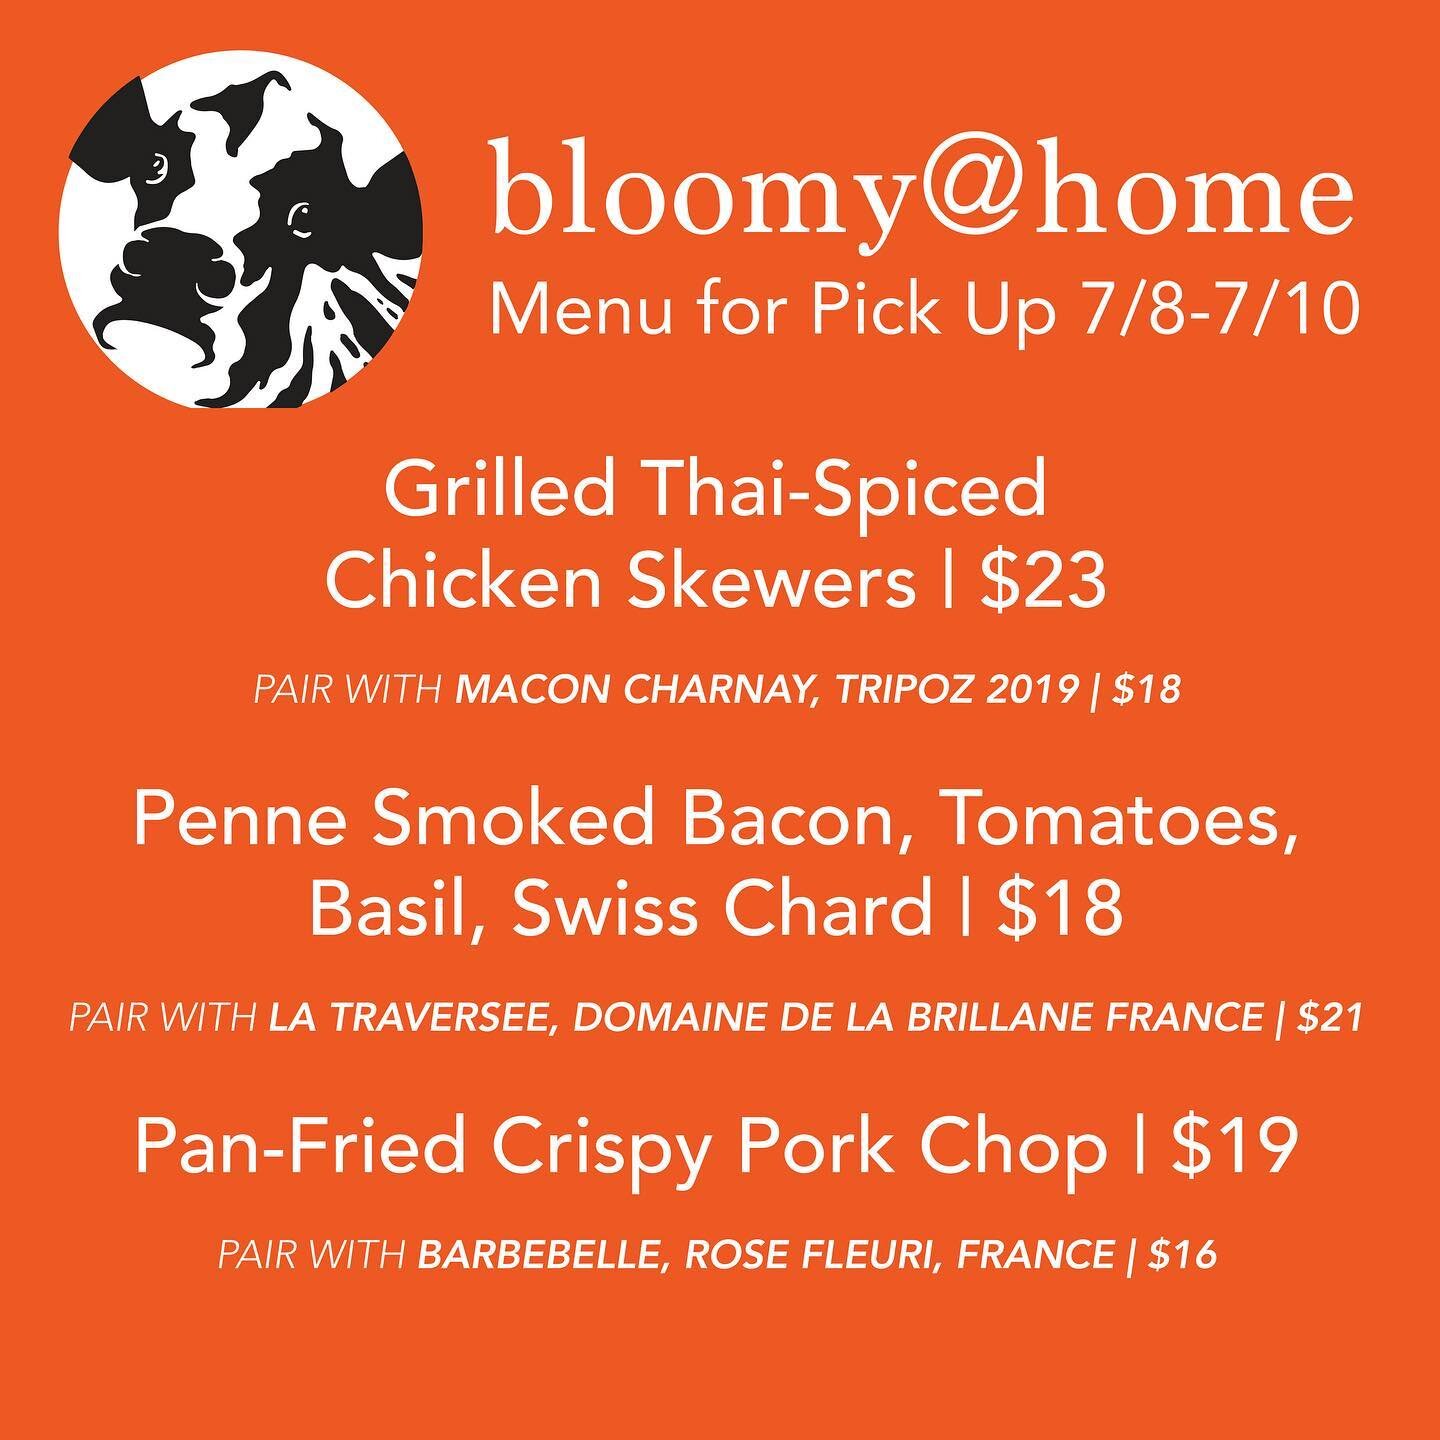 Because this weekend didn't give us enough weather whiplash, let's go into another rollercoaster week... but fear not! You have the Bloomy@Home menu to keep you steady.

Order your faves on our website bloomyrind.com/bloomy-at-home and be ready, no m